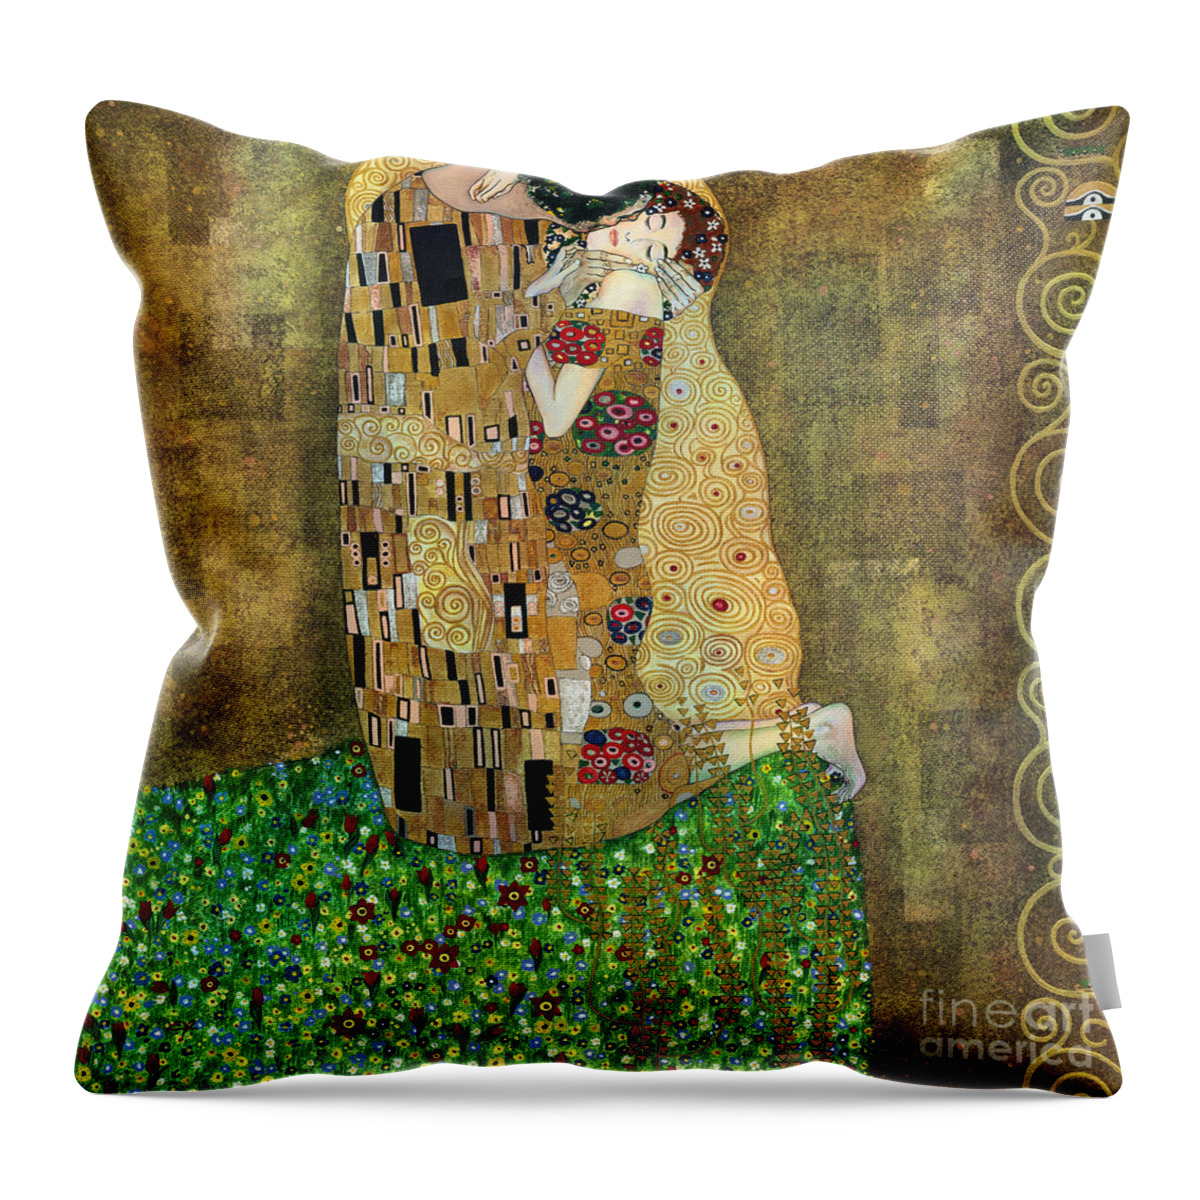 Acrylic Throw Pillow featuring the painting My acrylic painting as an interpretation of the famous artwork of Gustav Klimt The Kiss - Yakubovich by Elena Daniel Yakubovich